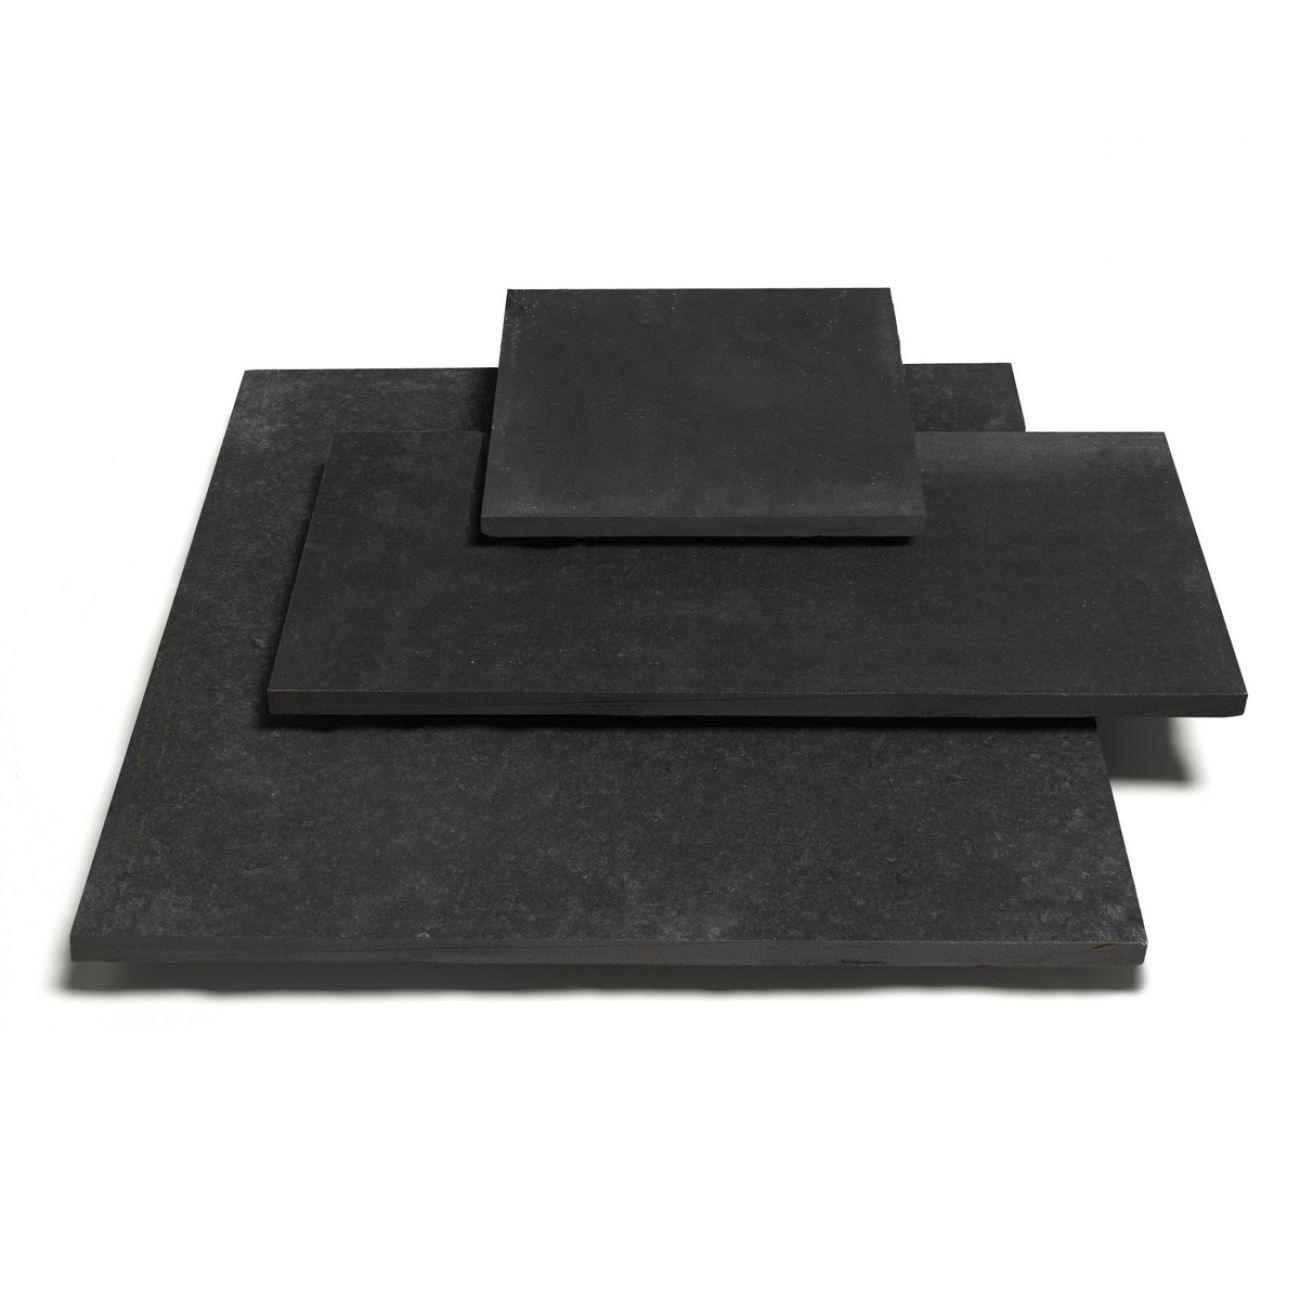 Black Natural Indian Limestone Paving Slabs - Riven - Patio Pack - 22mm